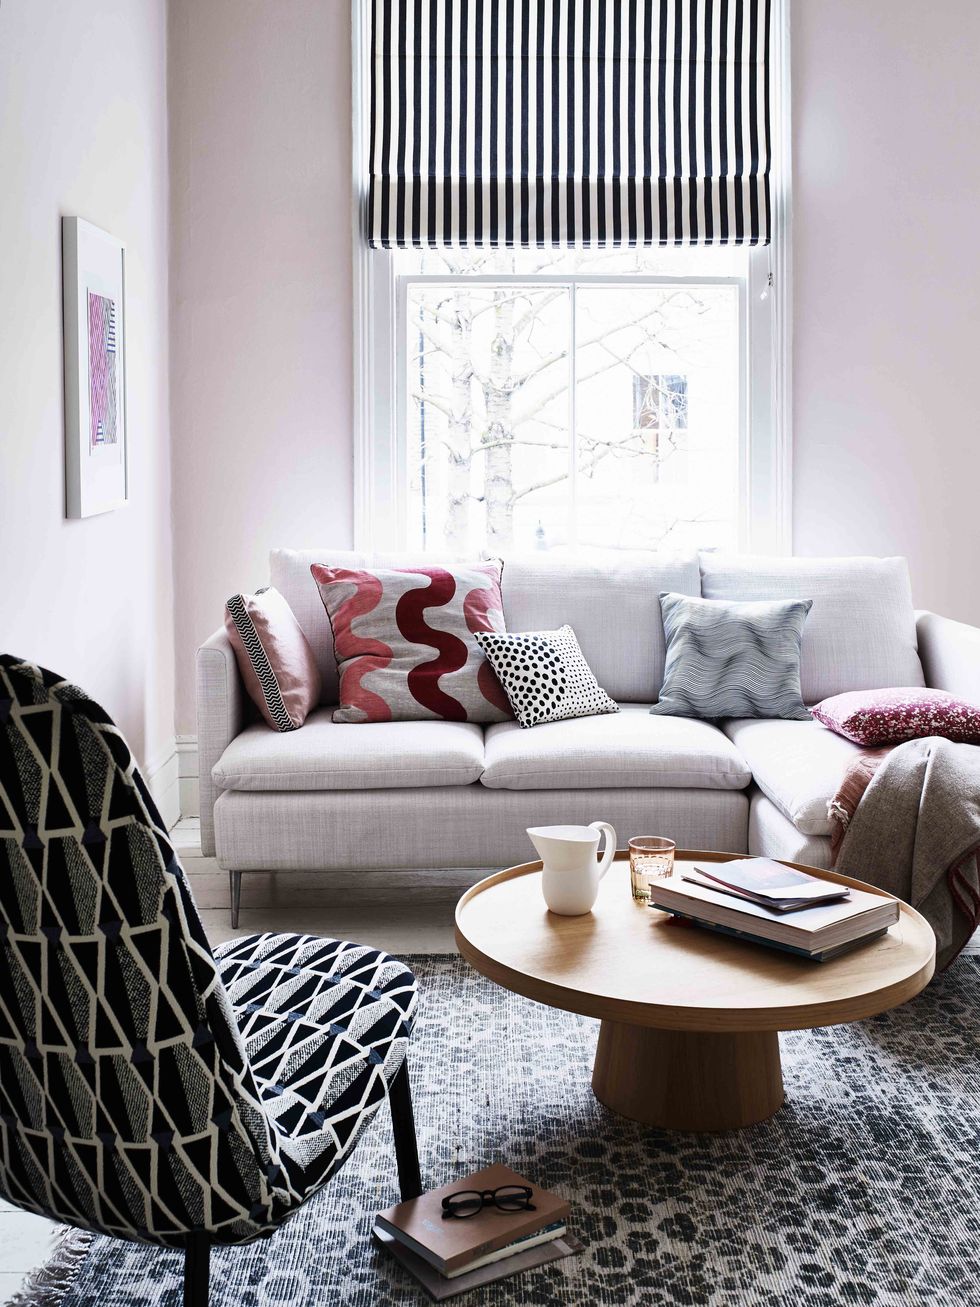 13 Stylish Ways To Use Pattern In Your Home